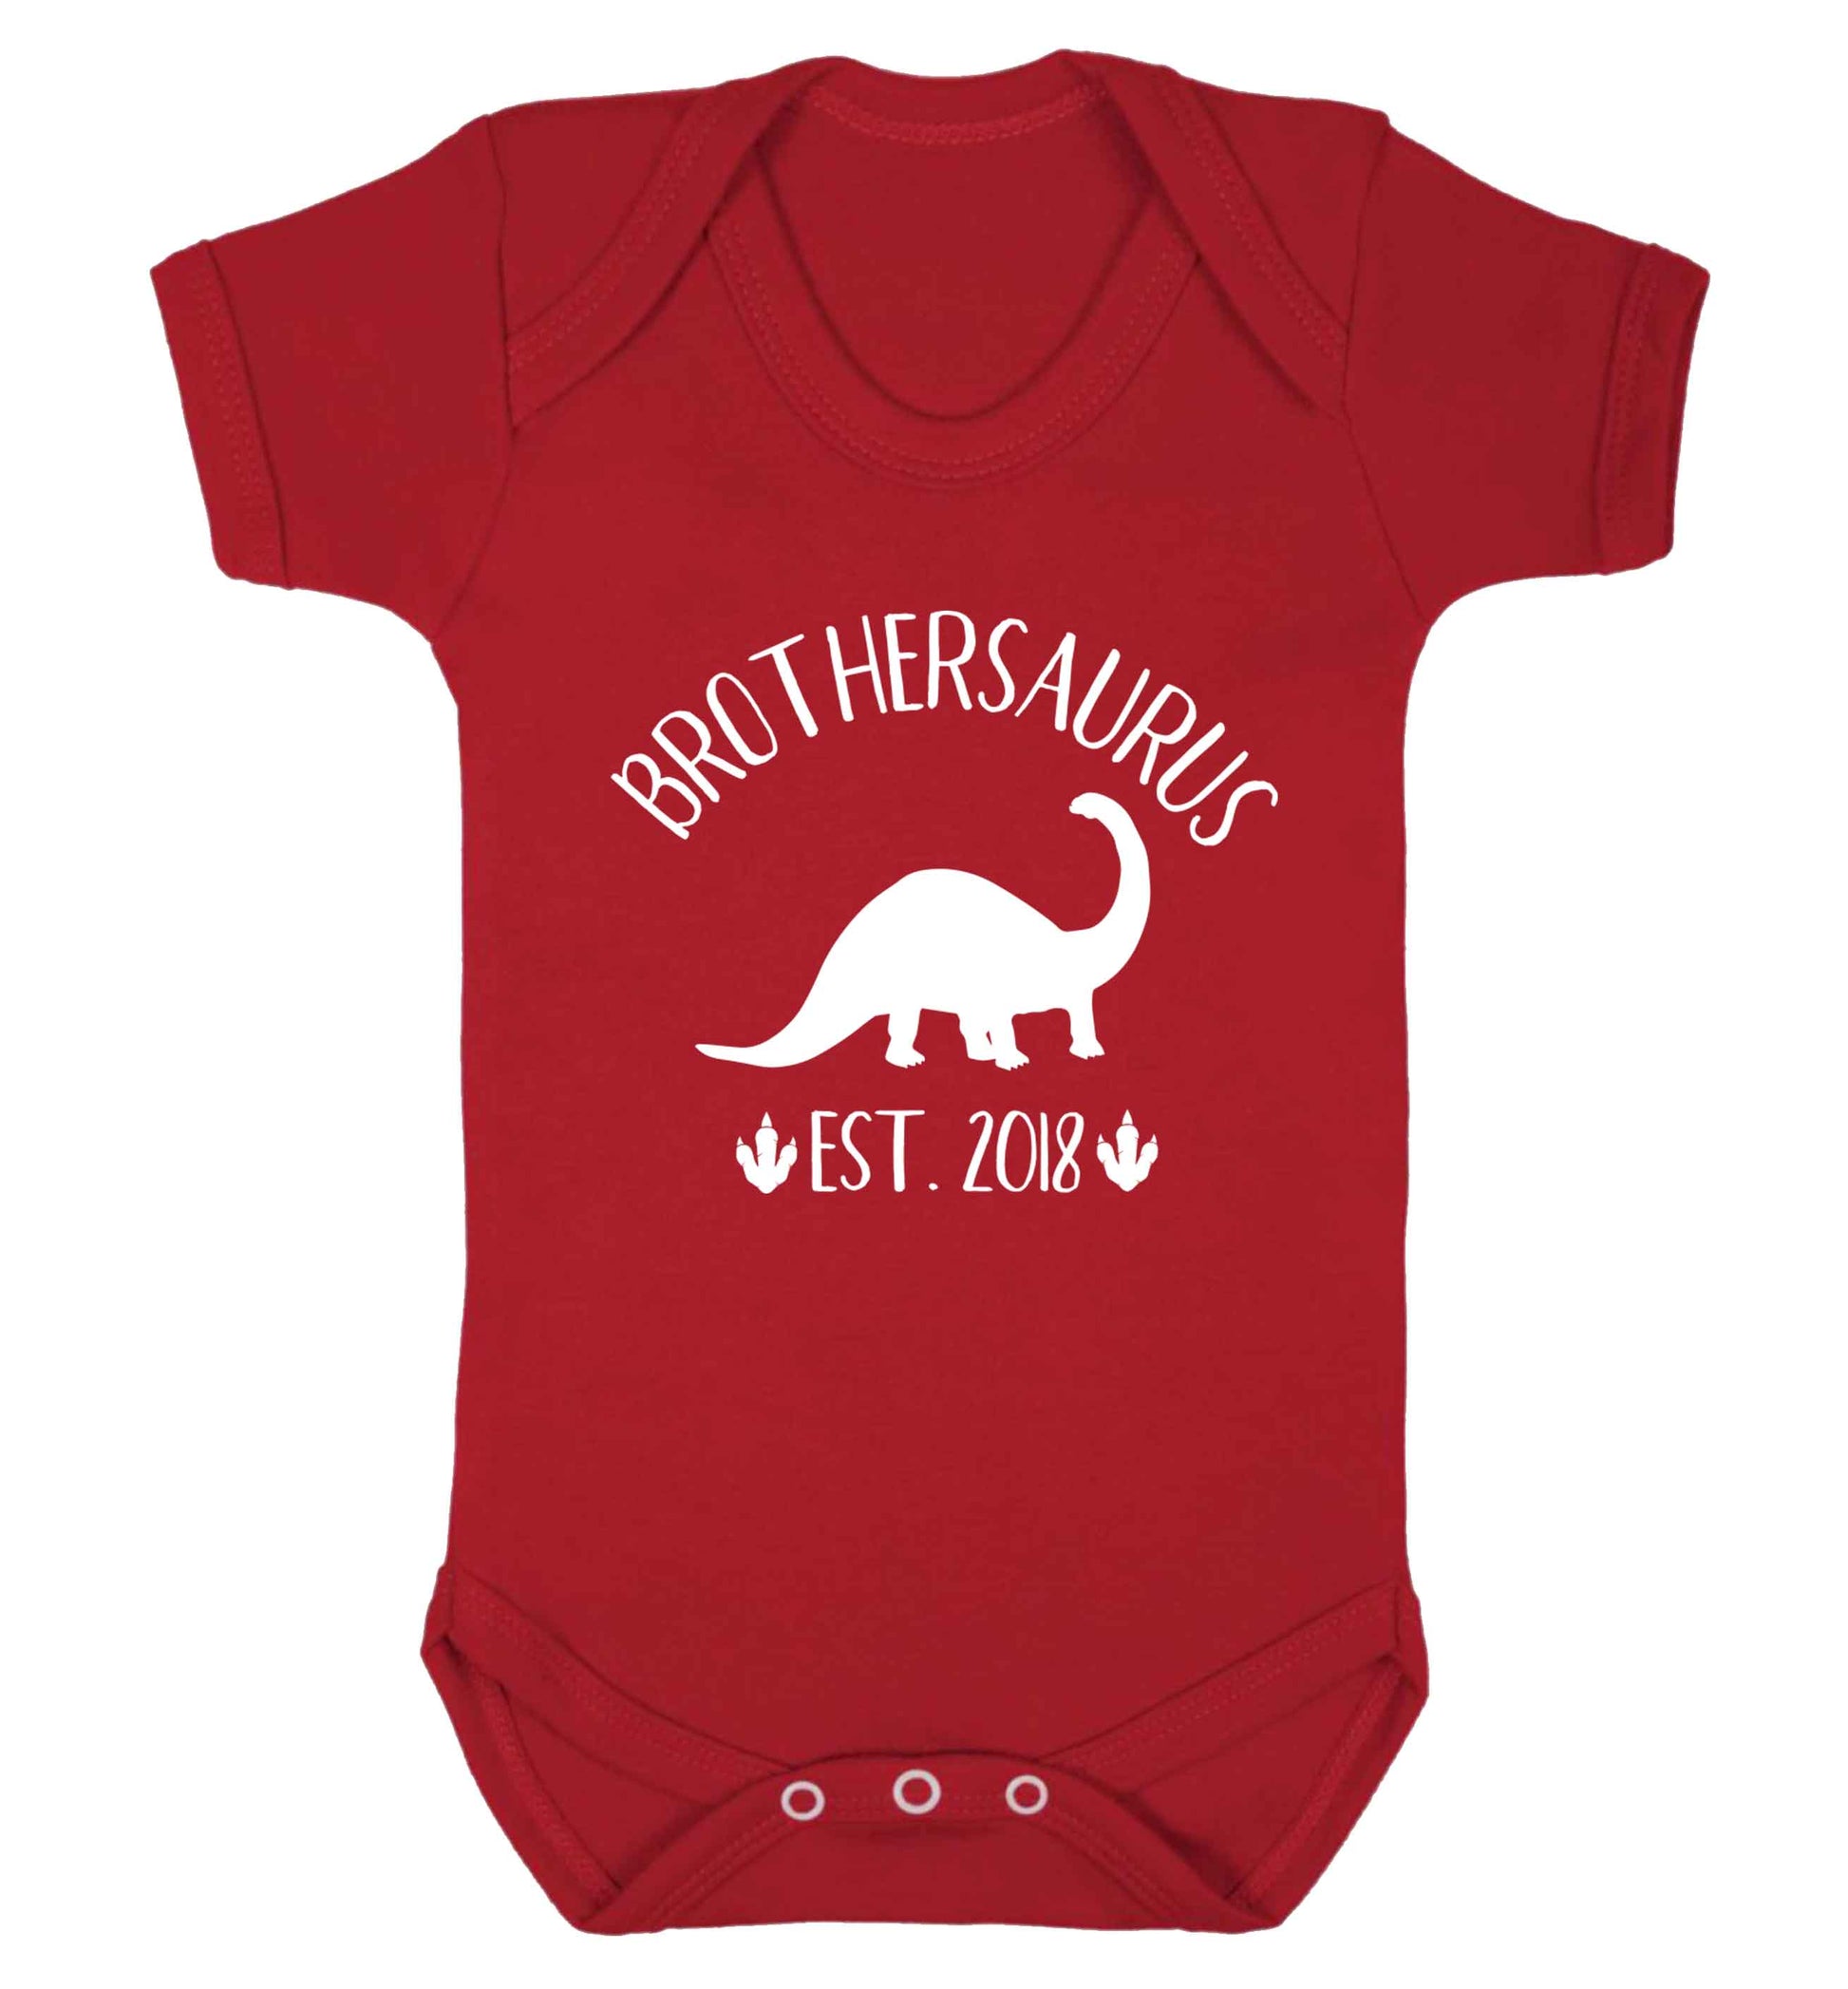 Personalised brothersaurus since (custom date) Baby Vest red 18-24 months